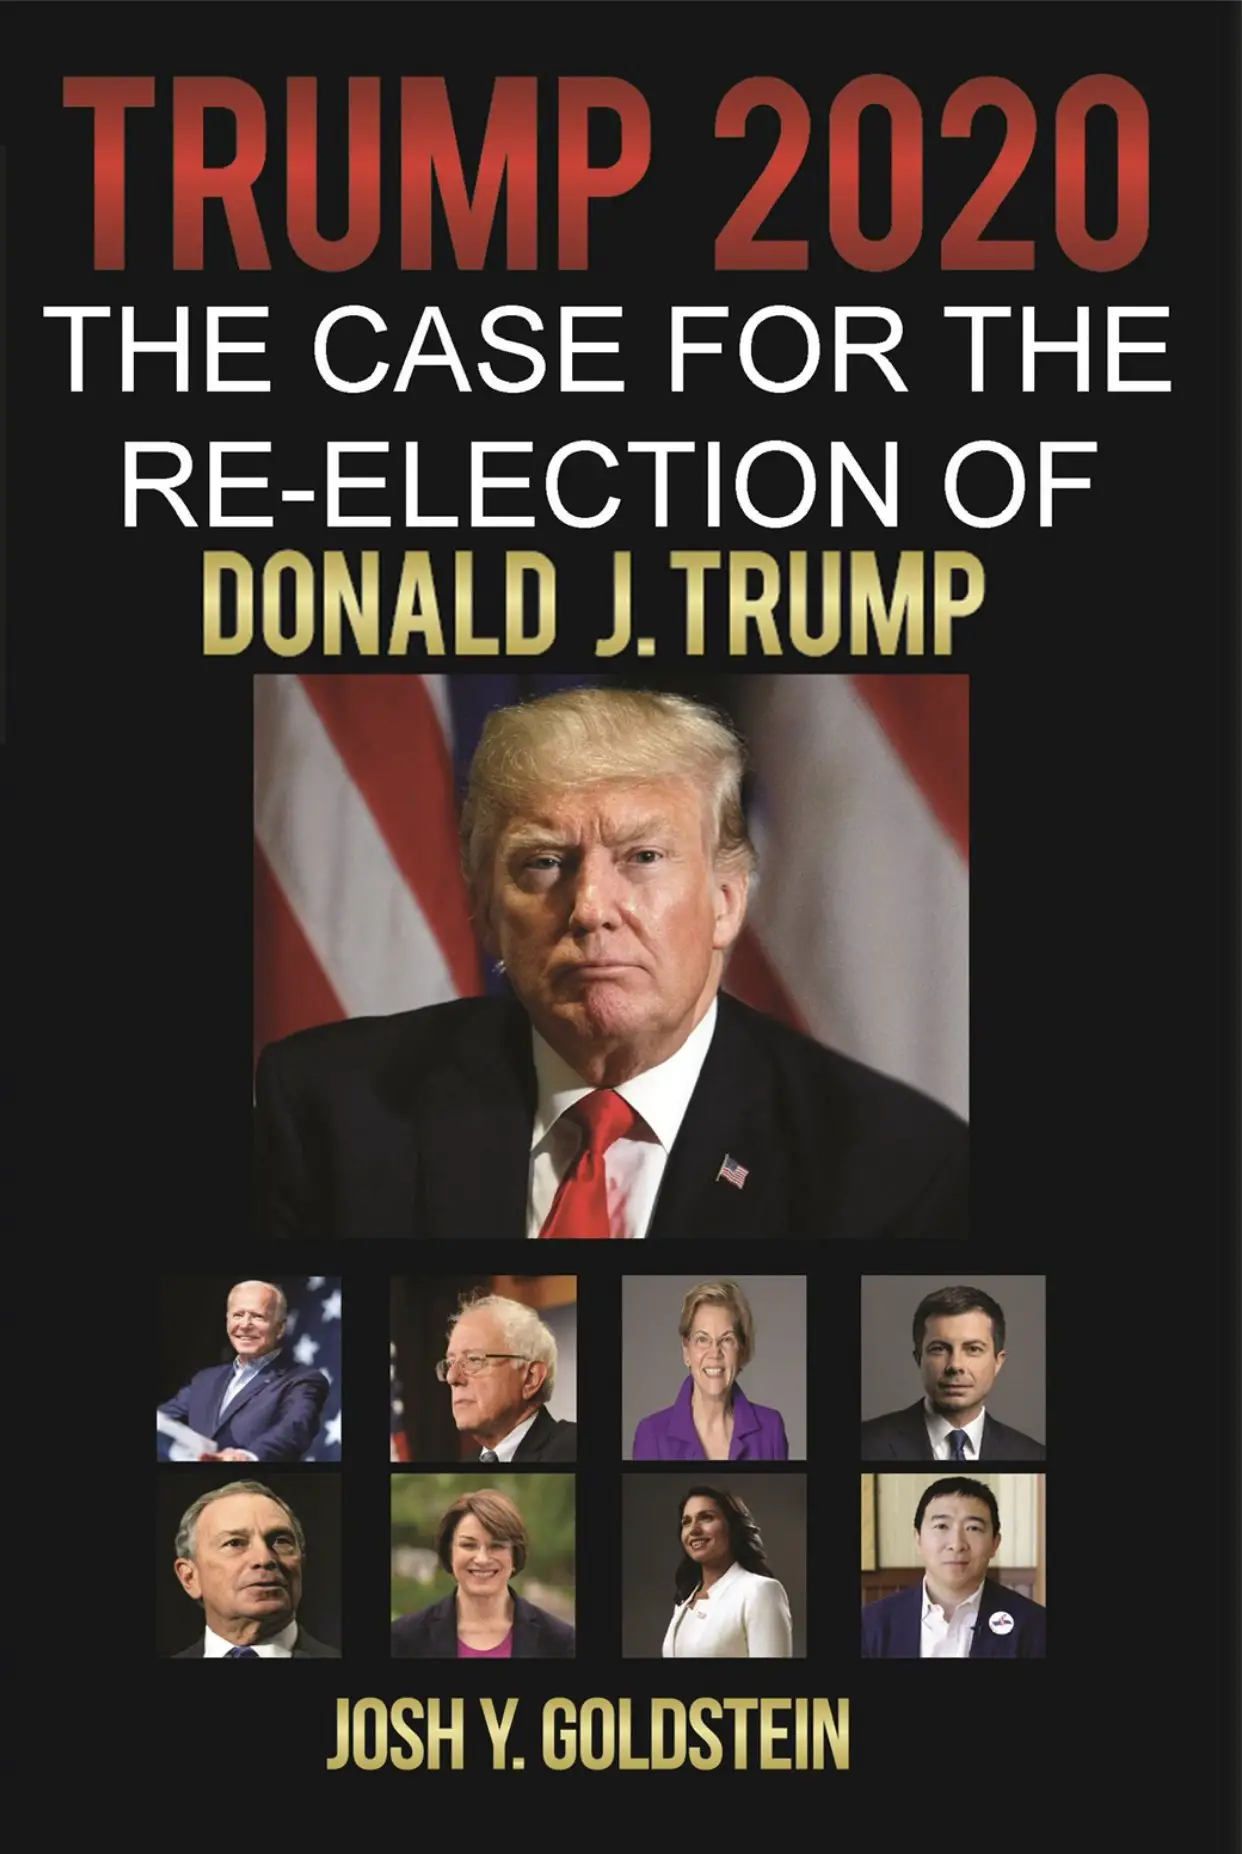 Trump 2020: The Case for the Re